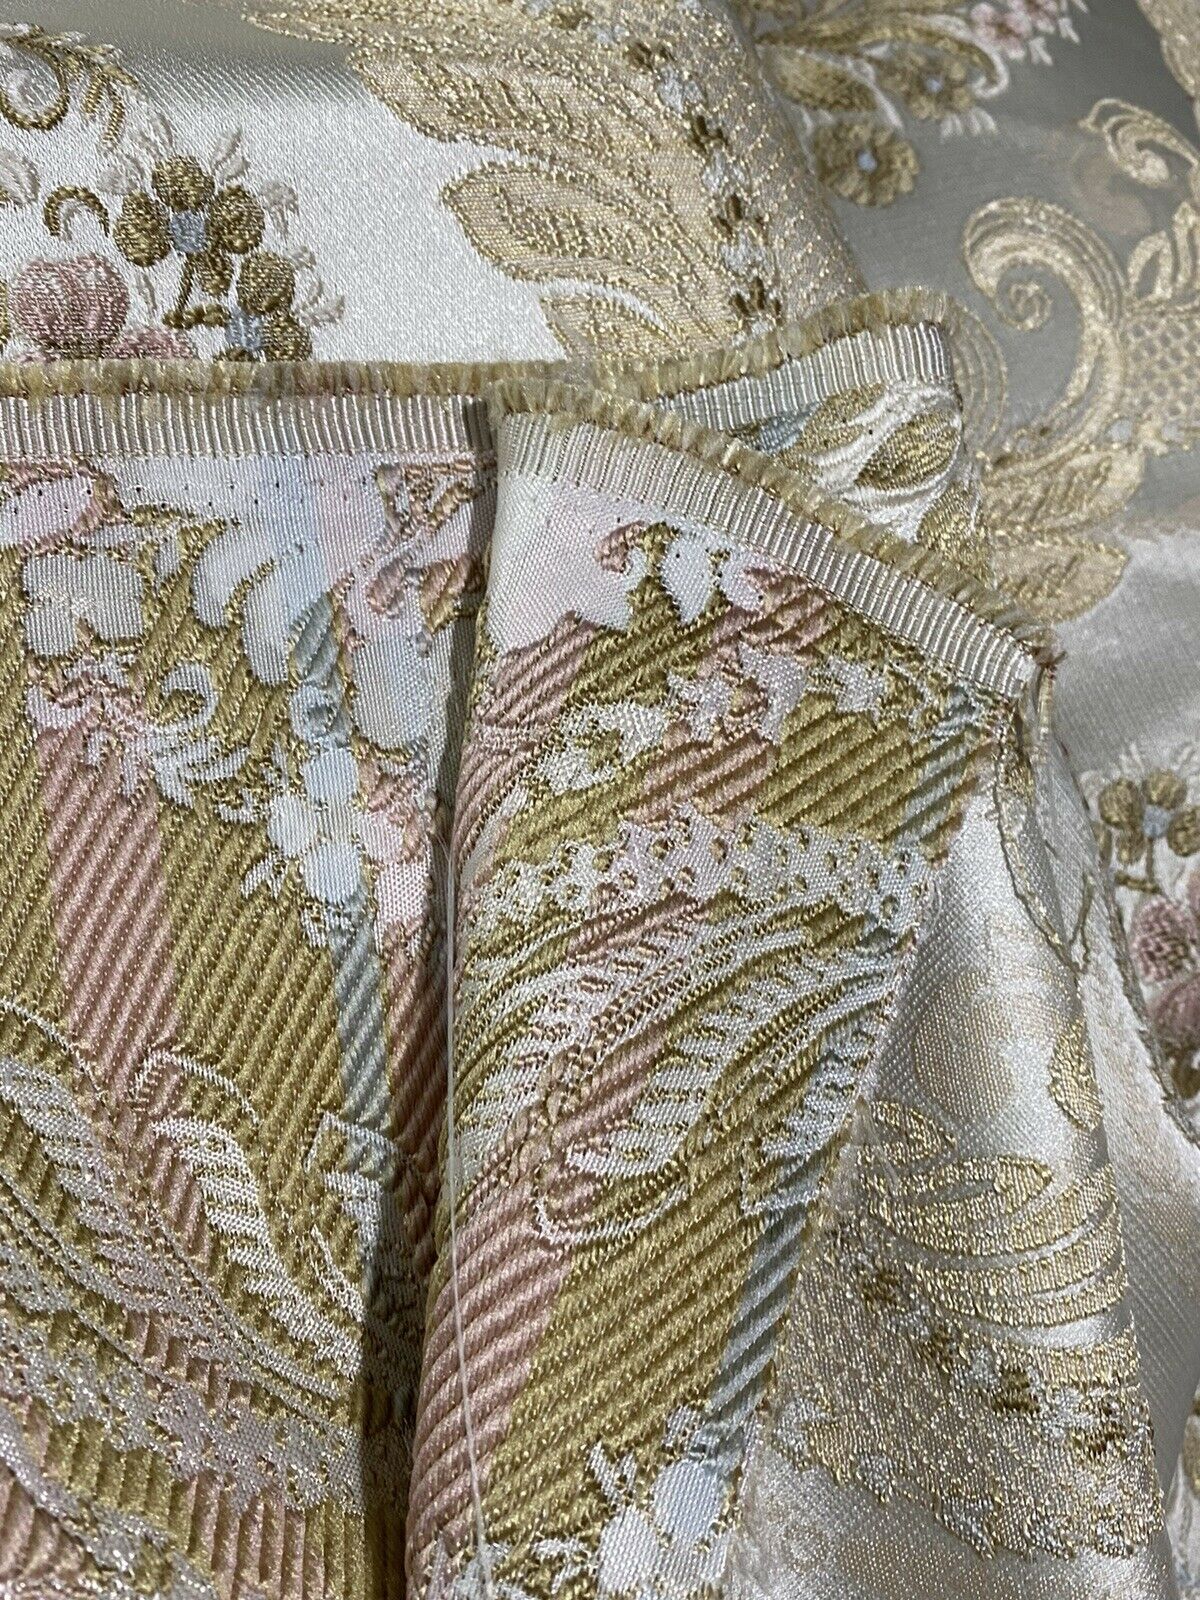 NEW King Louis XIV Novelty Neoclassical Brocade Medallion Floral Satin  Fabric - Taupe